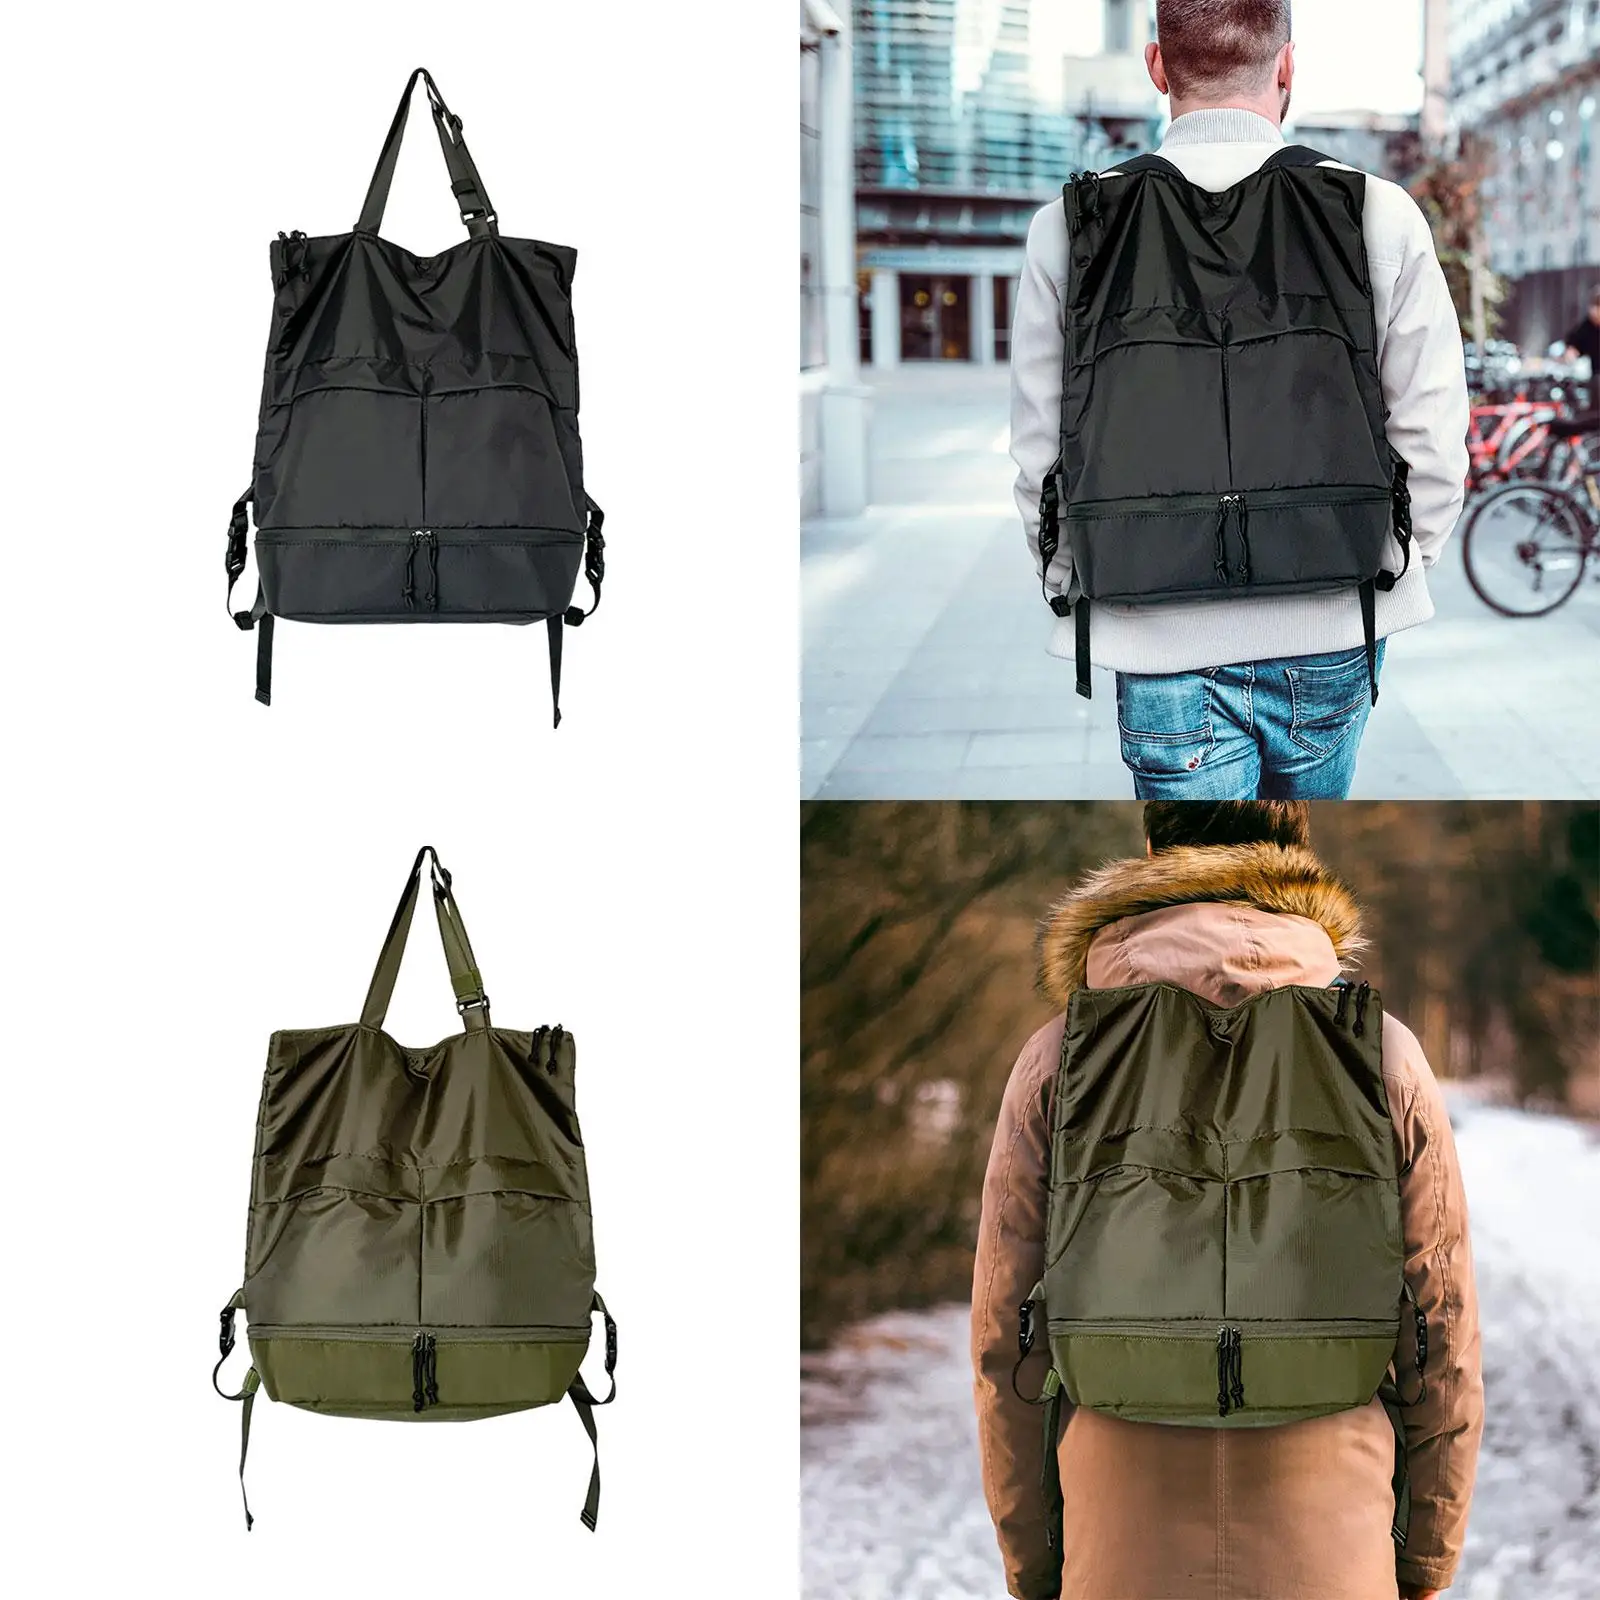 Fashion Backpack Portable with Adjustable Shoulder Straps Stylish Daypack for Hiking Party Climbing Indoor Outdoor Backpacking